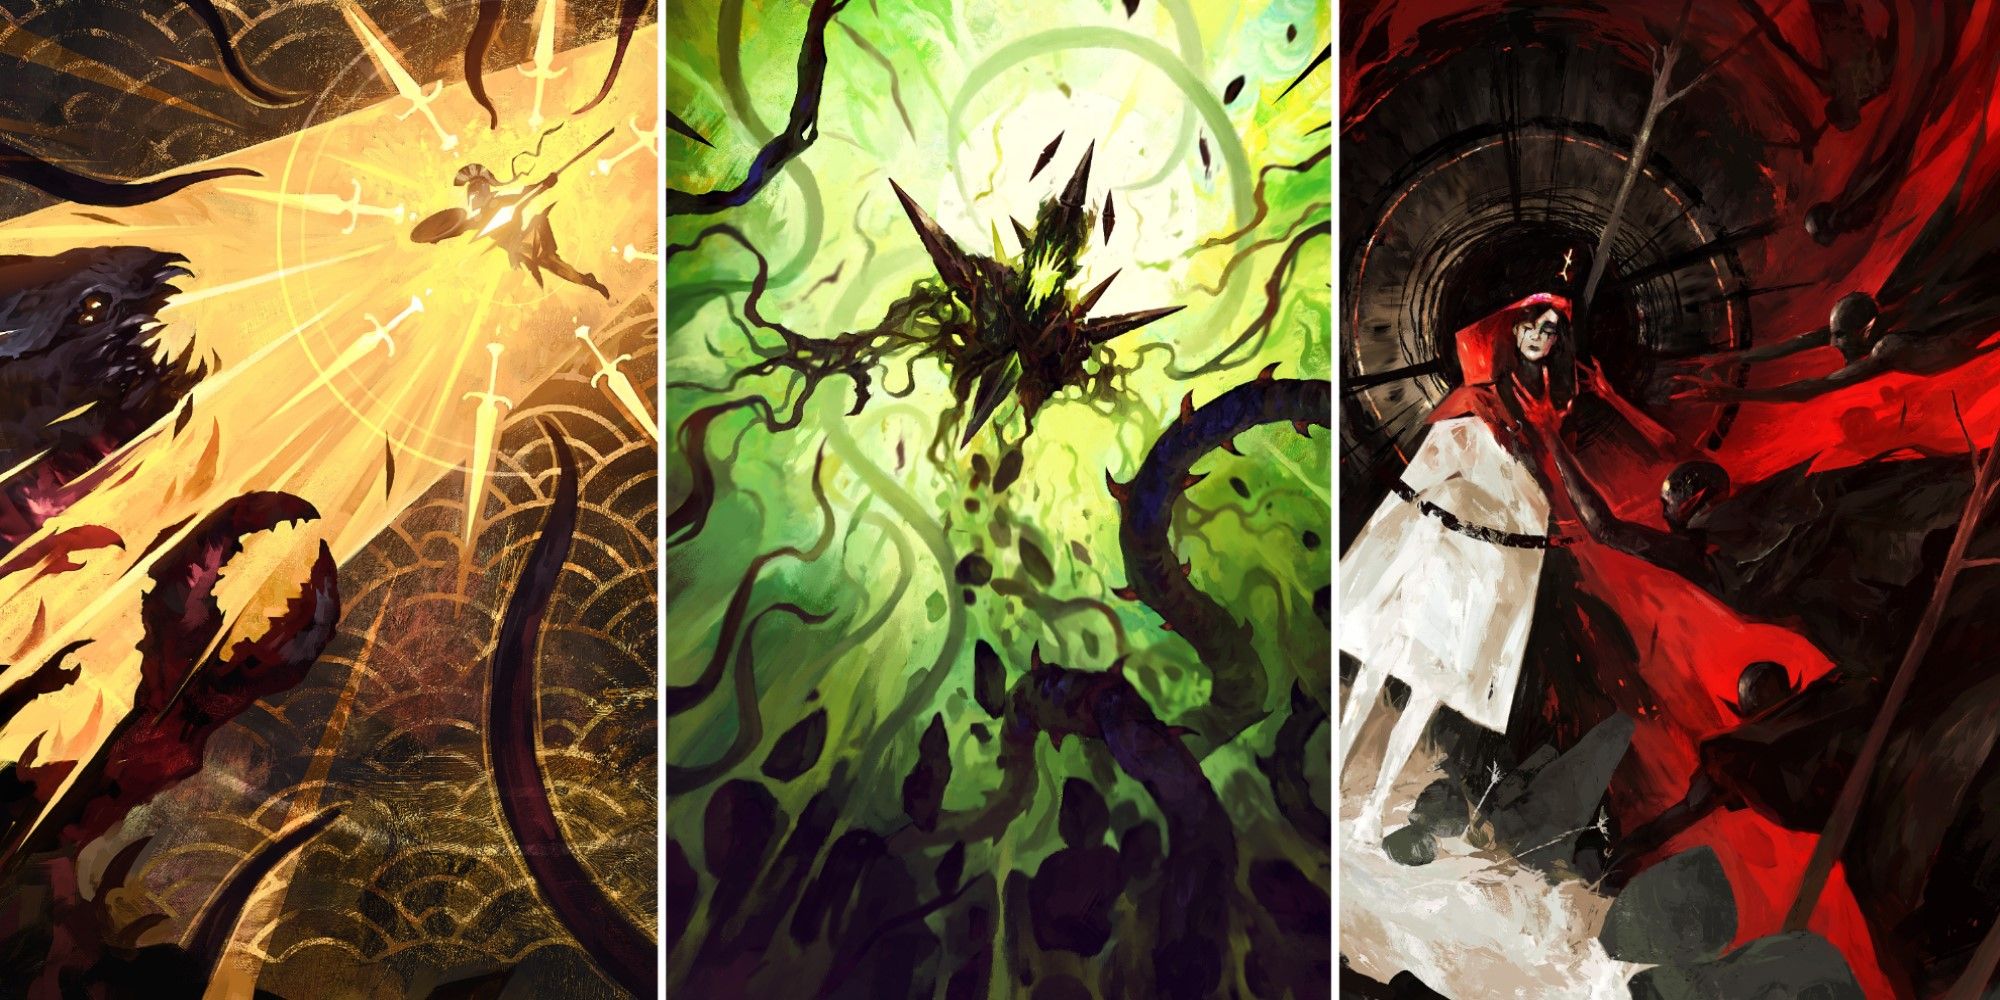 Artwork from Dominik Mayer, from three different Magic: The Gathering cards.